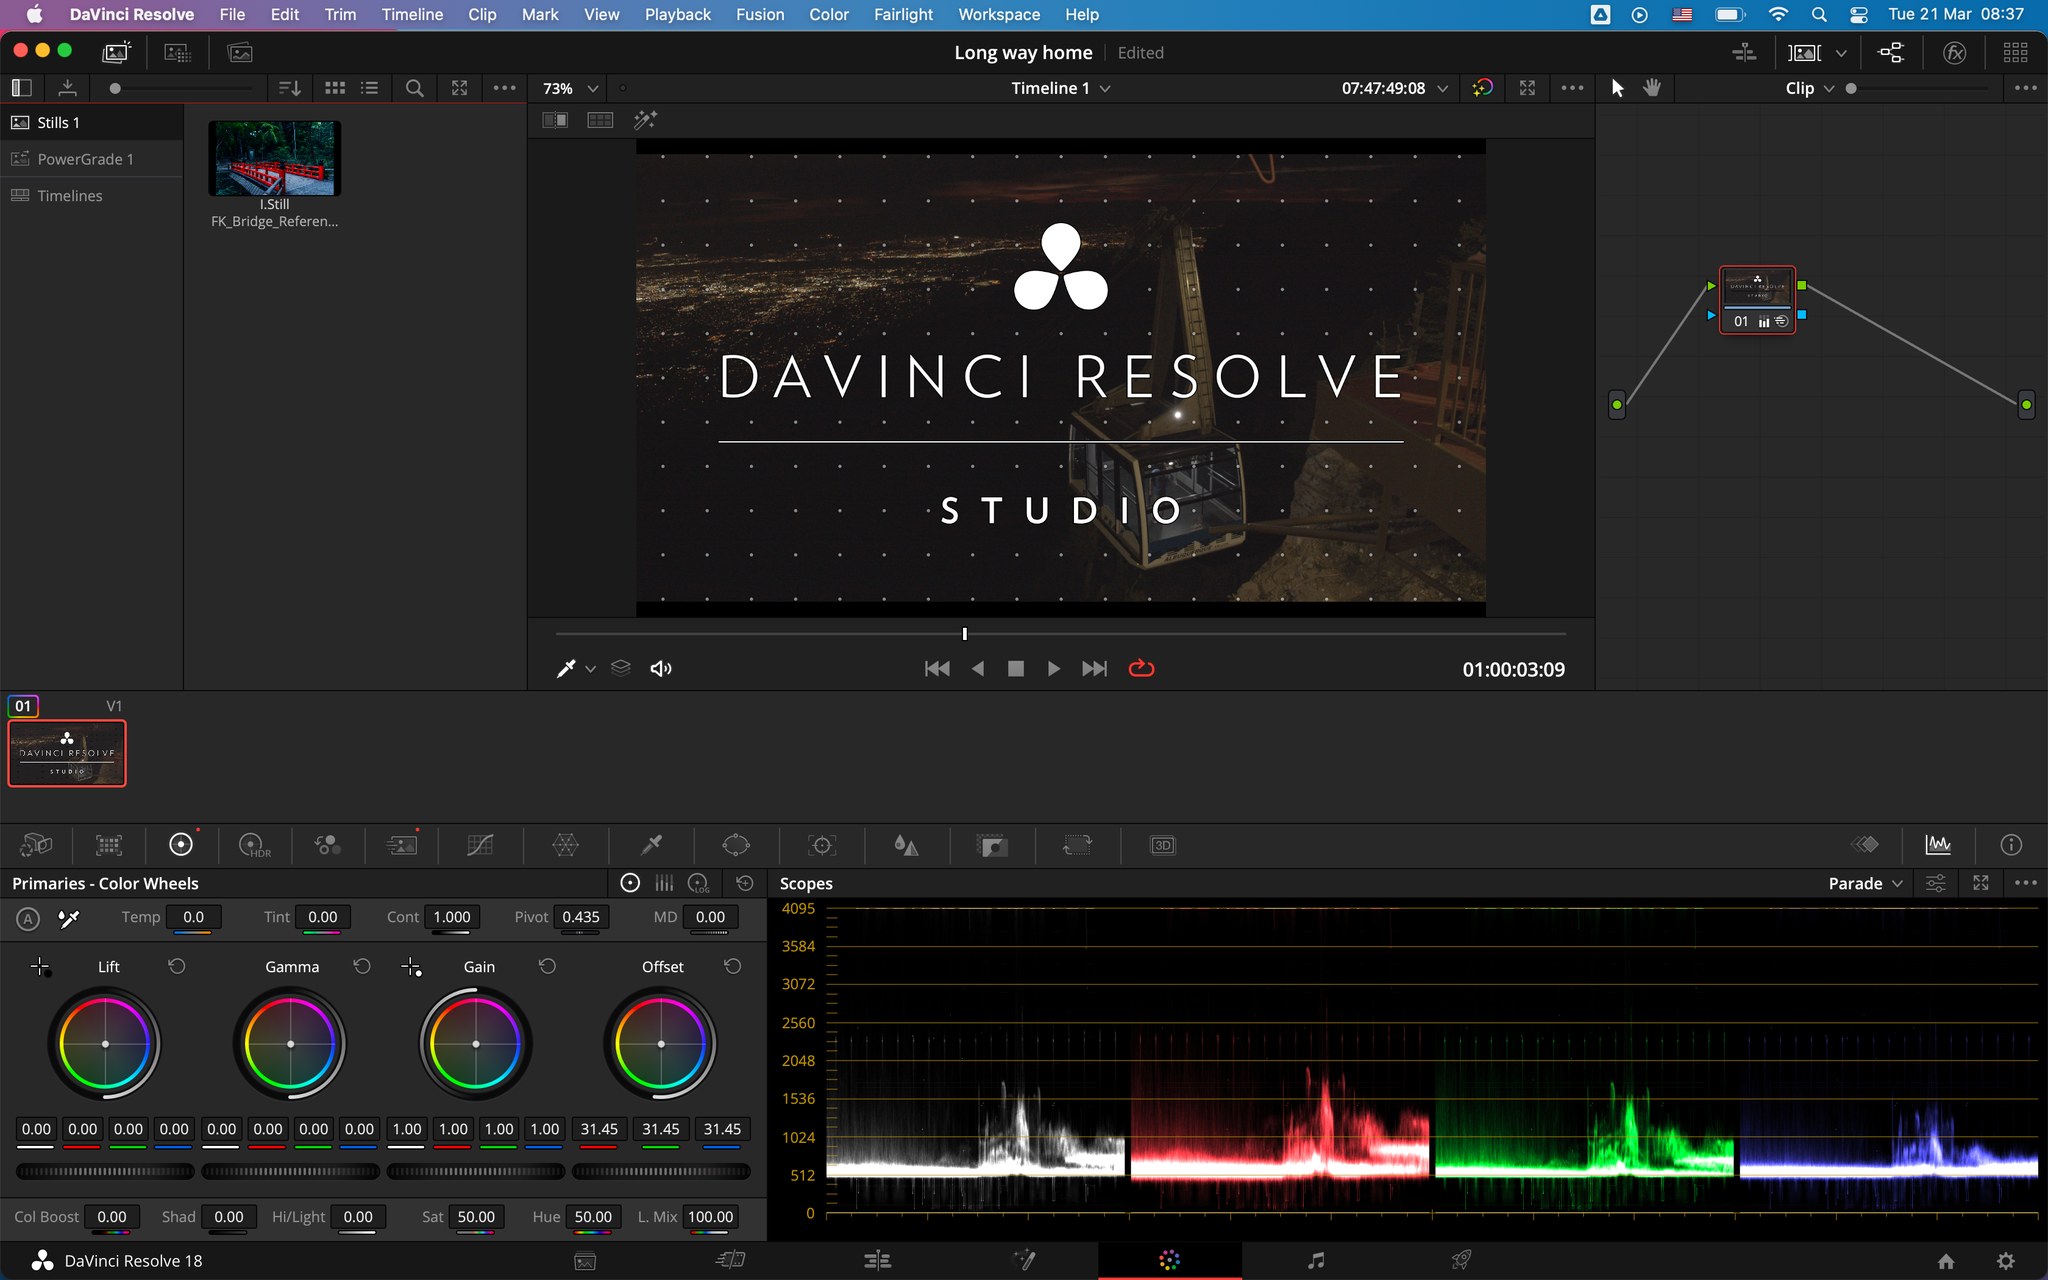 DaVinci Resolve: Why pay for the Studio version?